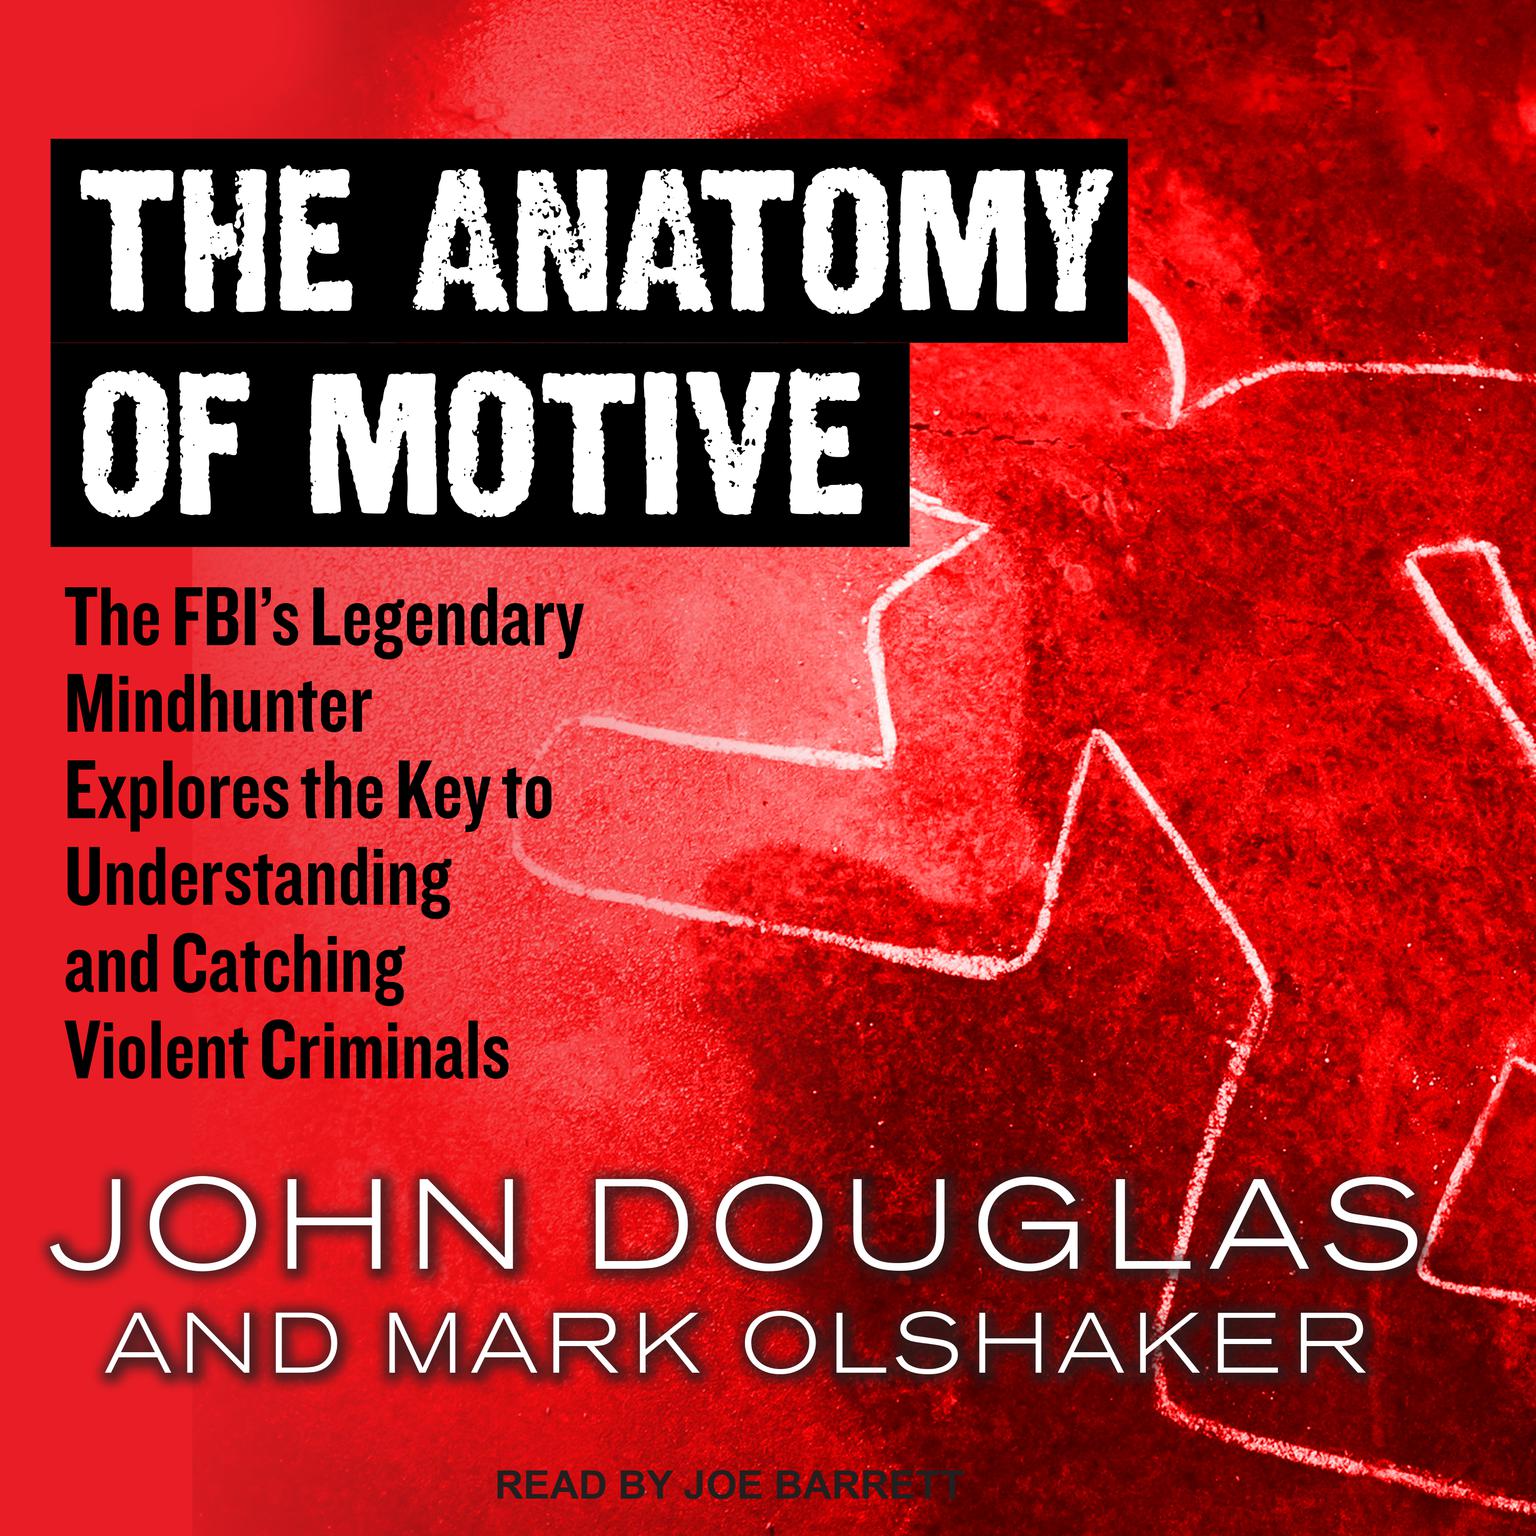 The Anatomy of Motive: The FBI’s Legendary Mindhunter Explores the Key to Understanding and Catching Violent Criminals  Audiobook, by John E. Douglas